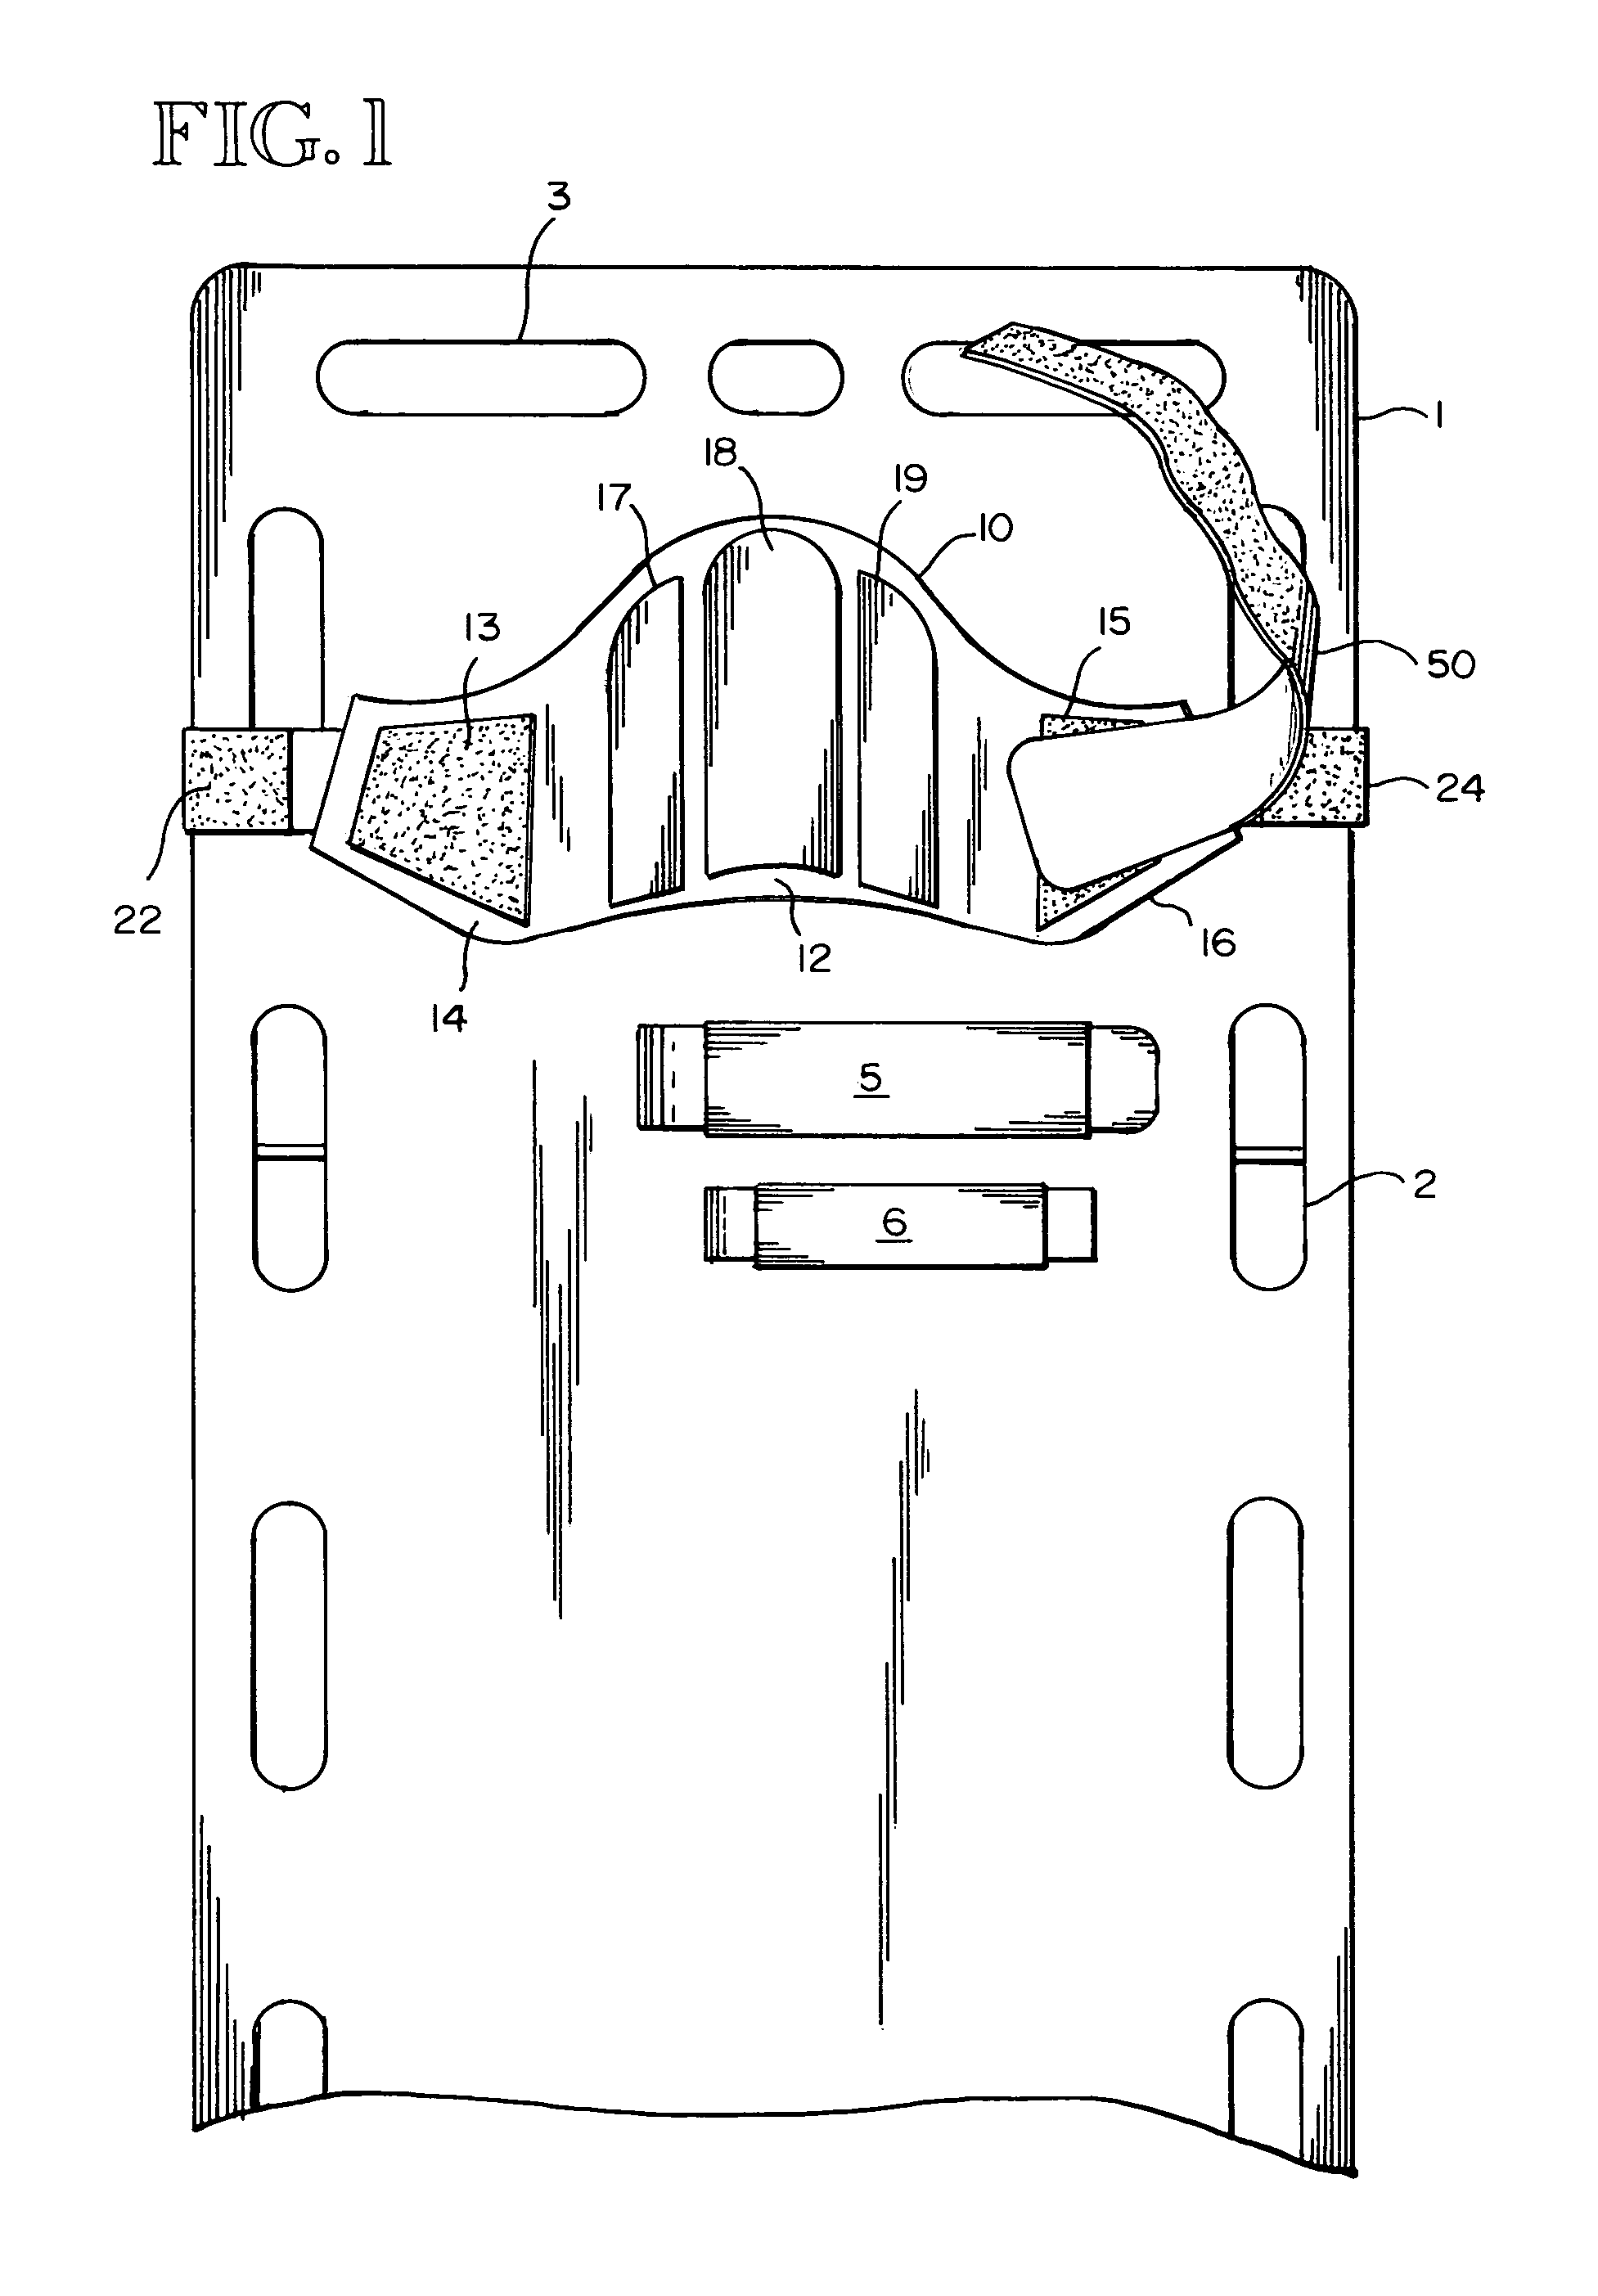 Method and device for stabilizing a patient's head on a spine board